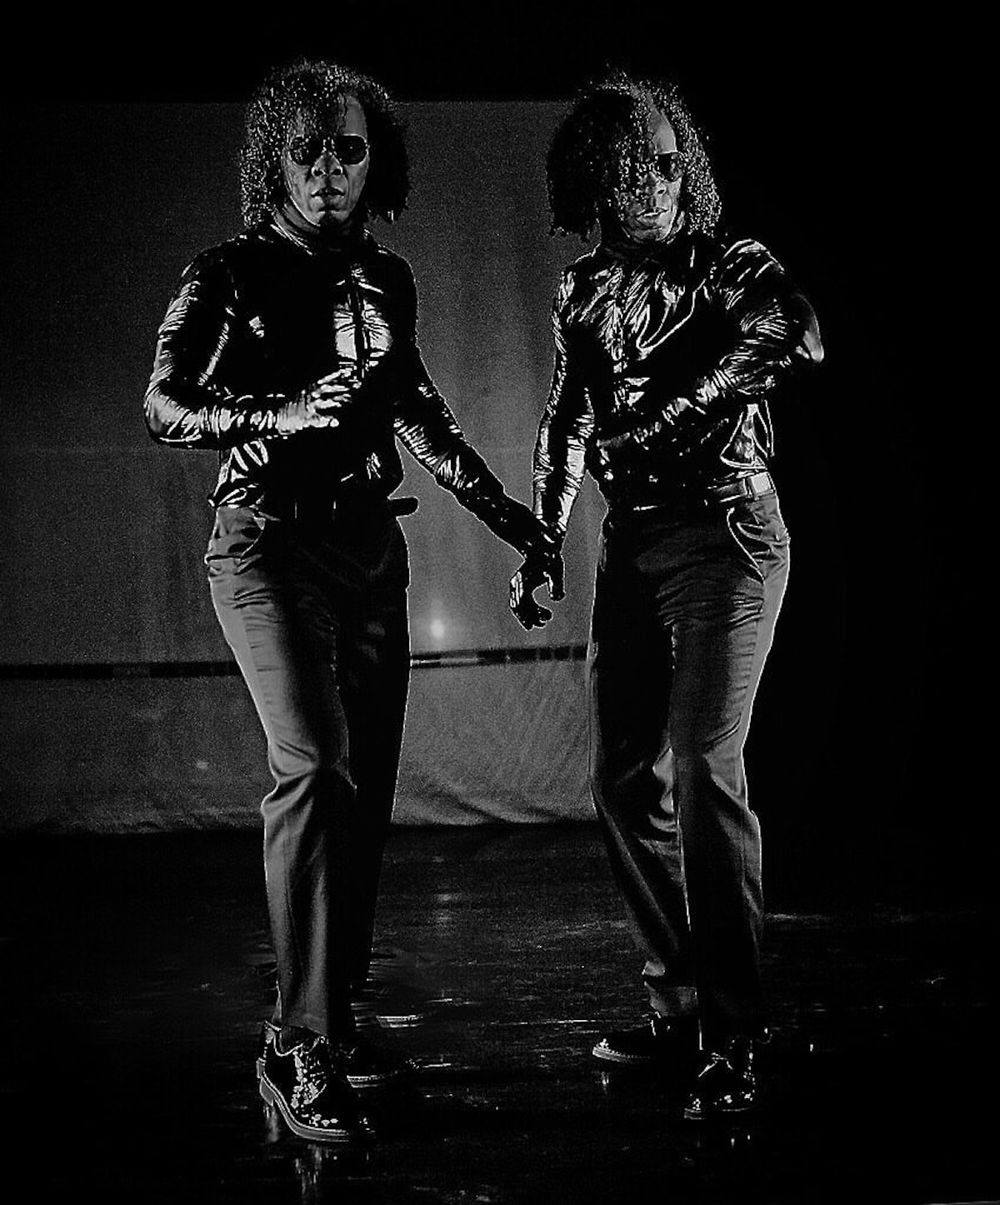 A black-and-white image of two figures standing stiffly in a dark interior. Both figures have curly mid-length hair and are dressed identically in dark pants, shiny jackets, and dark glasses. The figures look in different directions but are in mid-motion as if startled.